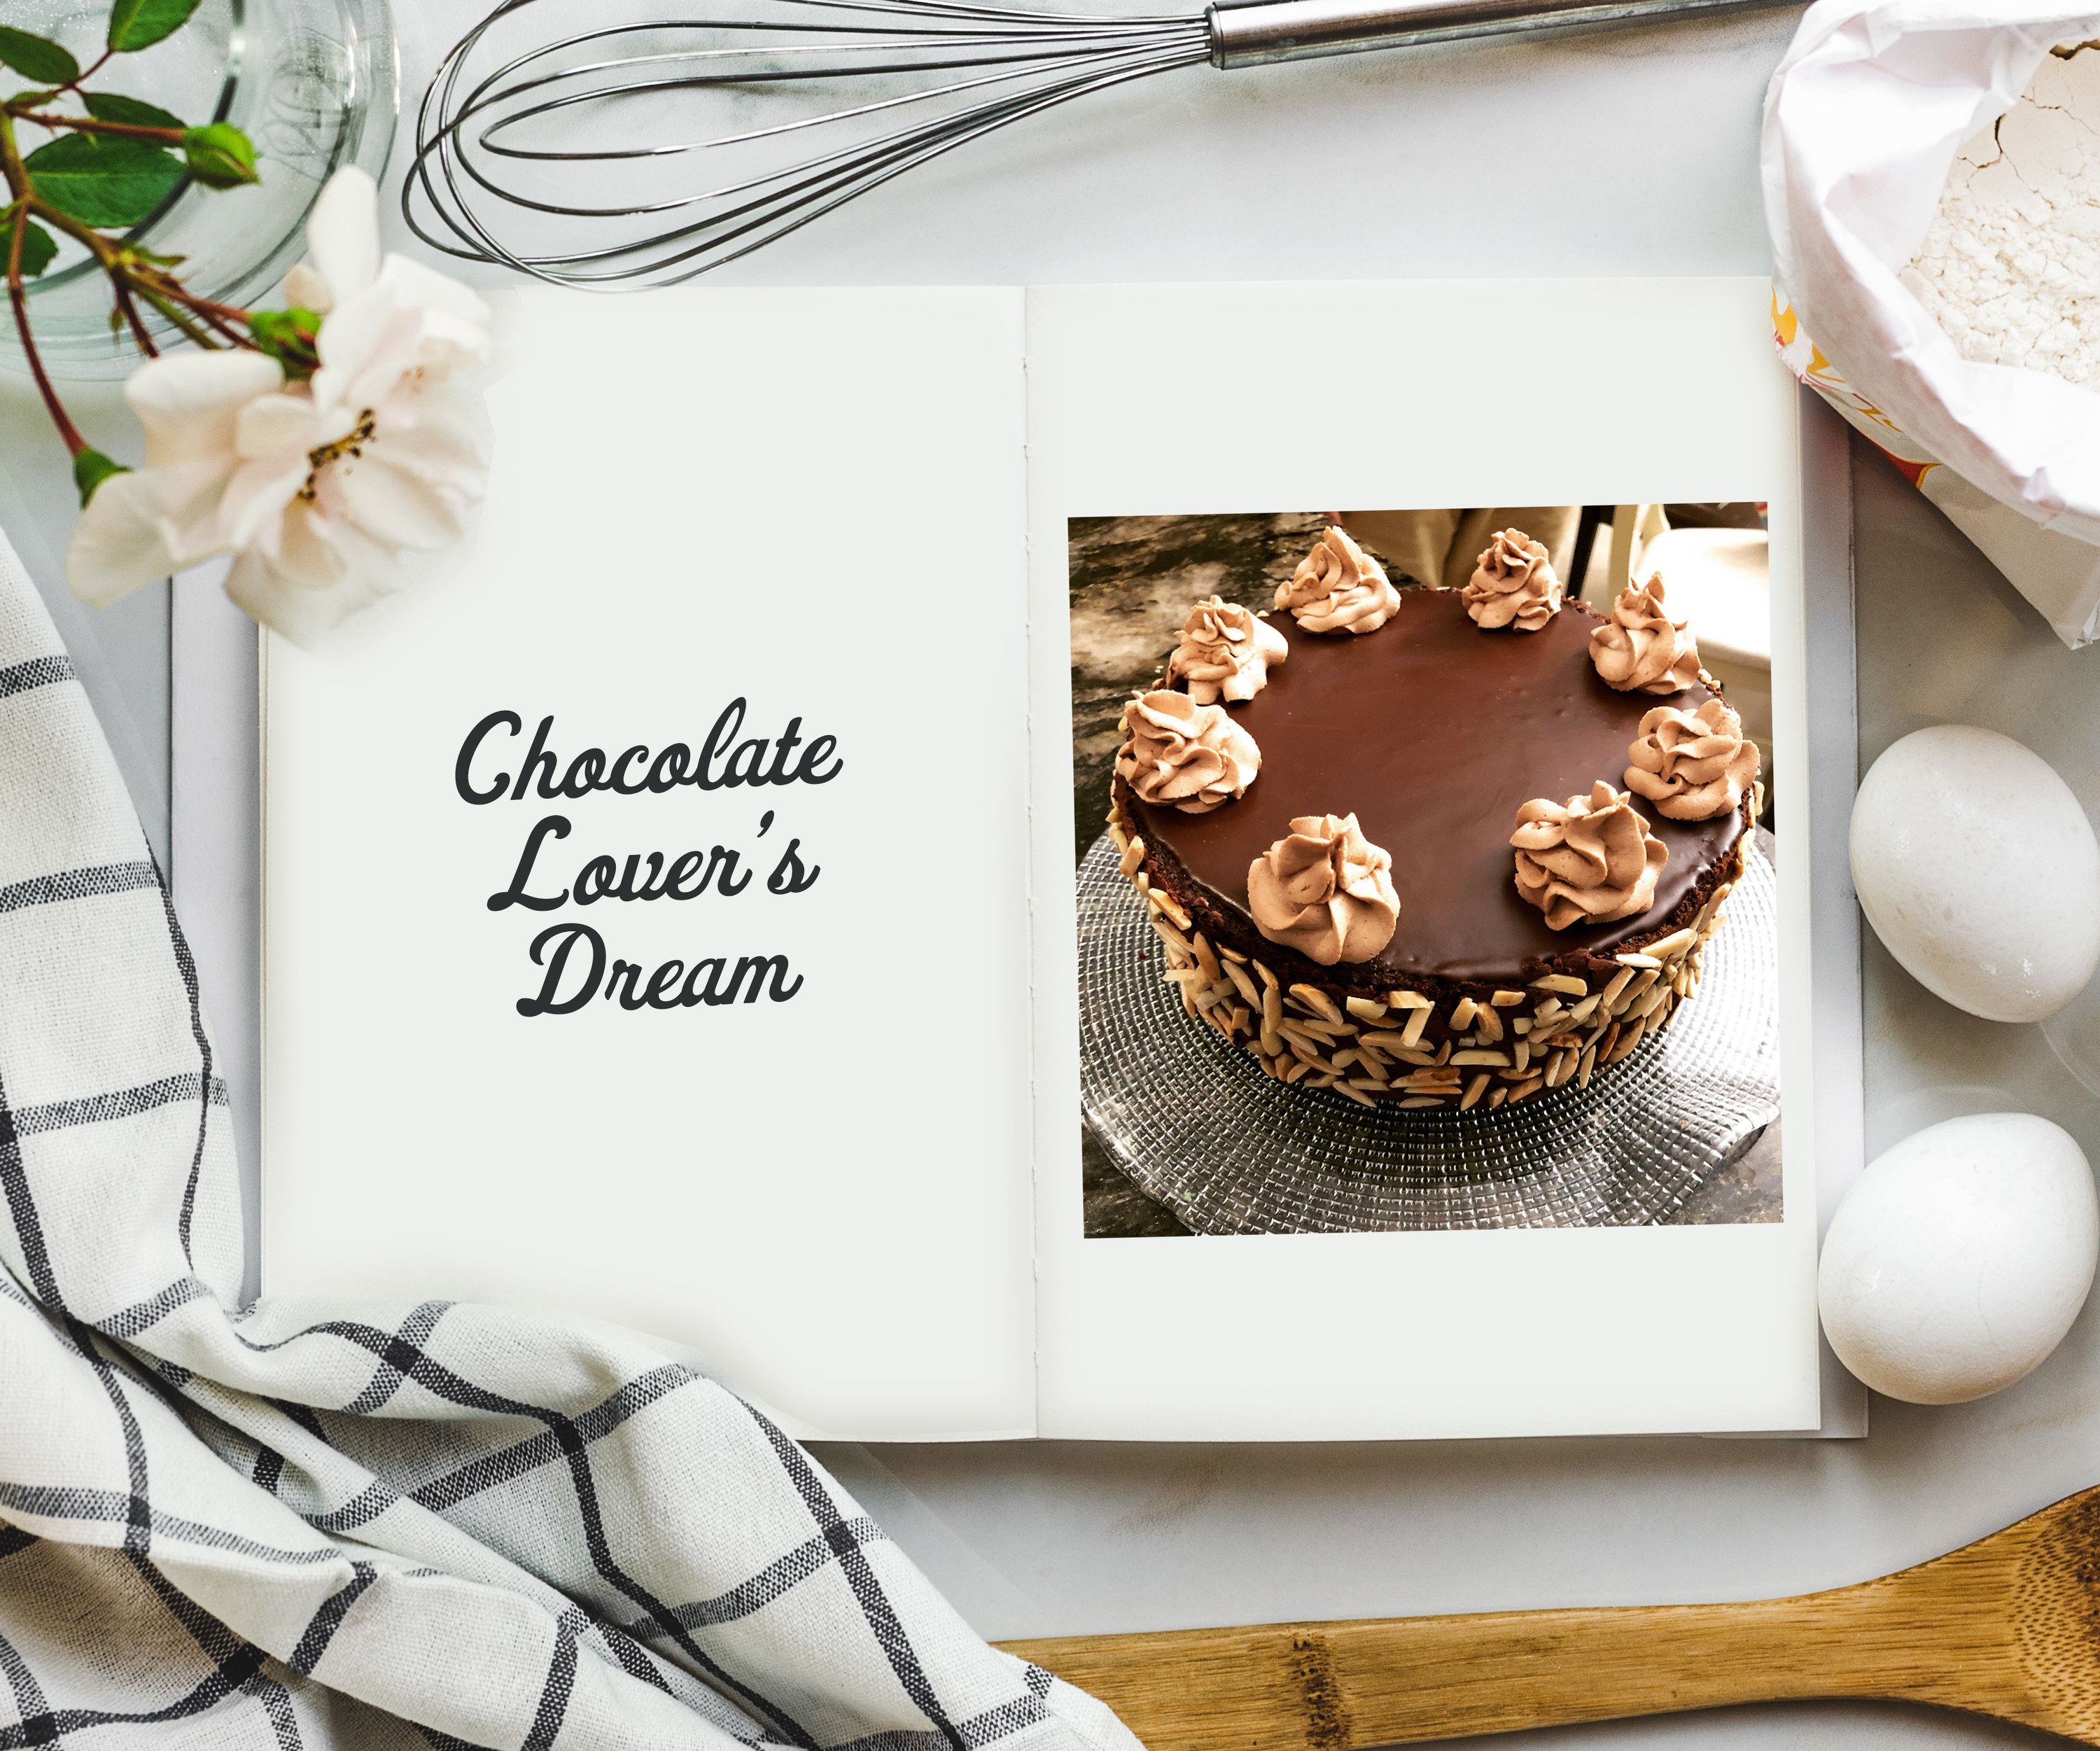 An overhead shot of cookbook on a table surrounded by ingredients and a photo on the inside of a dark chocolate cake on a cake stand with slivered almonds on the side and white piped florets on the top.